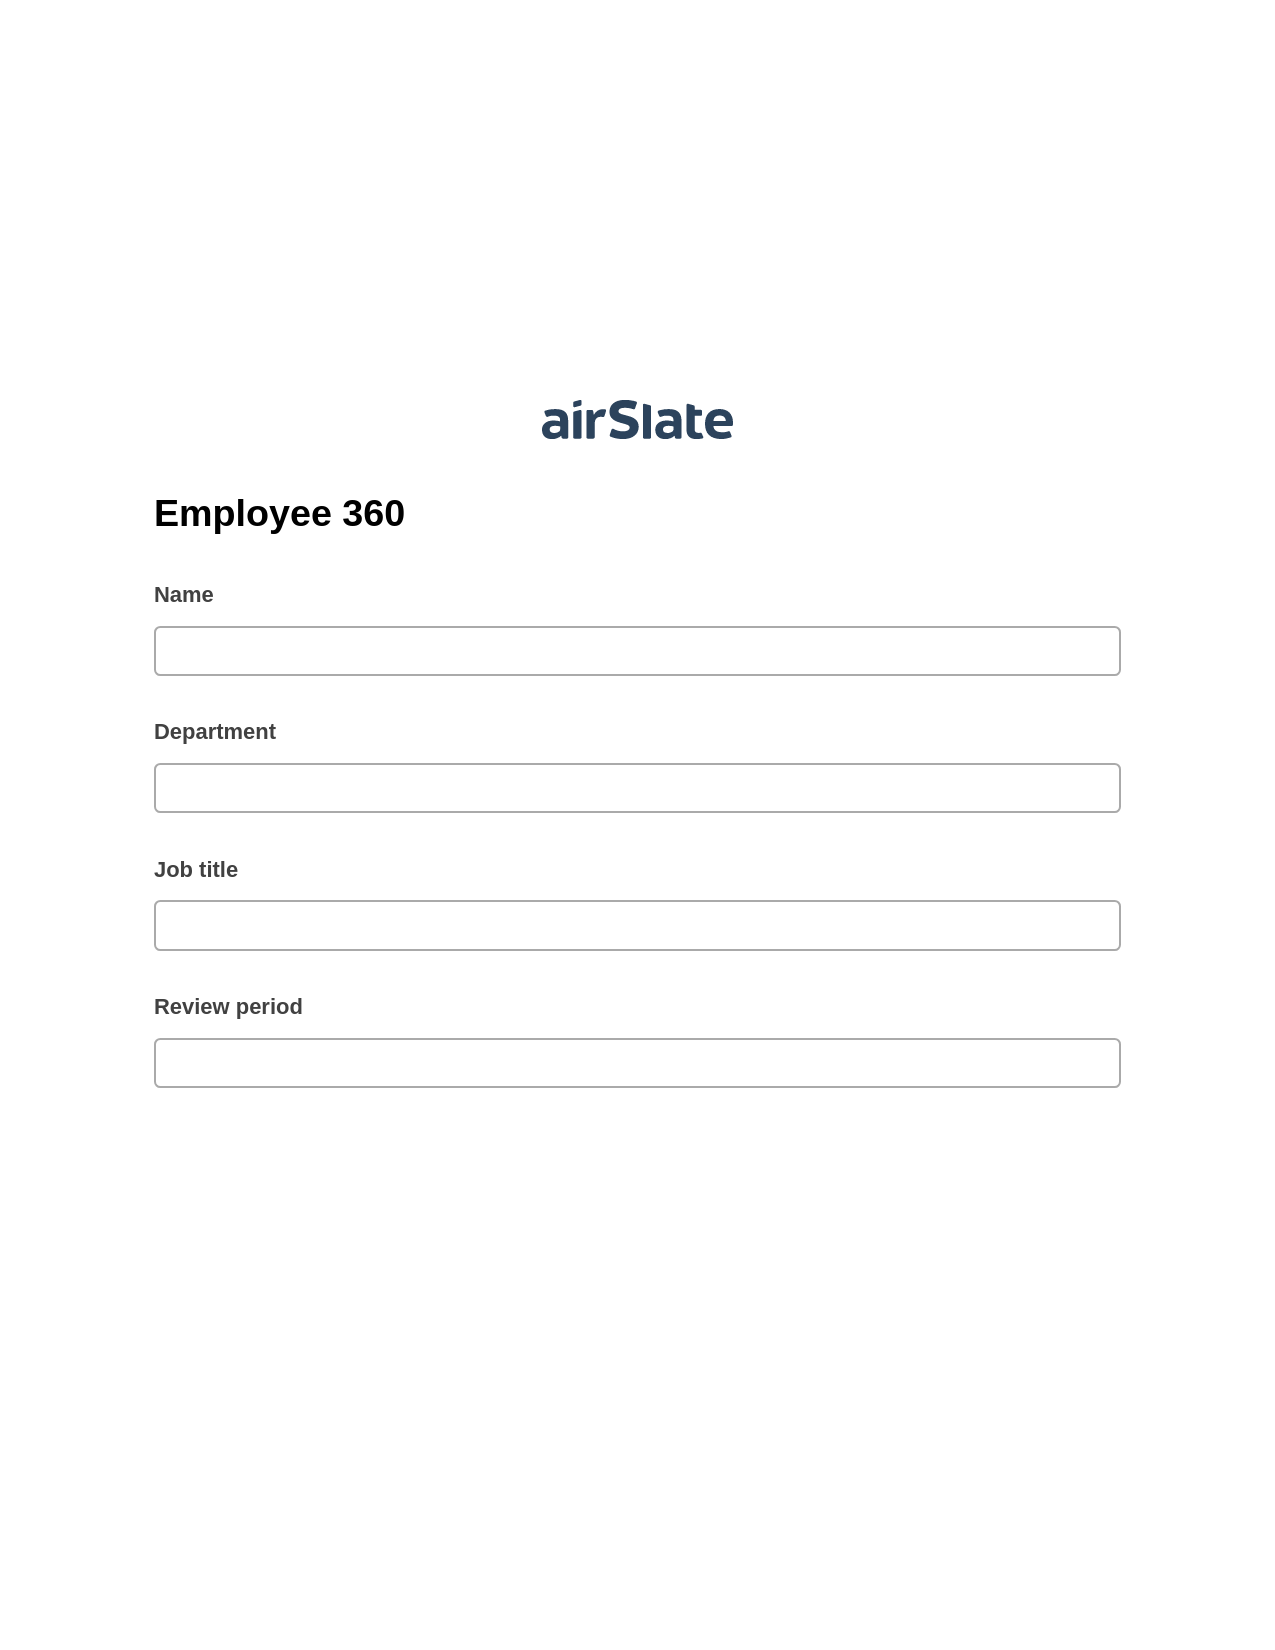 Multirole Employee 360 Pre-fill from Google Sheets Bot, Update MS Dynamics 365 Record Bot, Archive to SharePoint Folder Bot